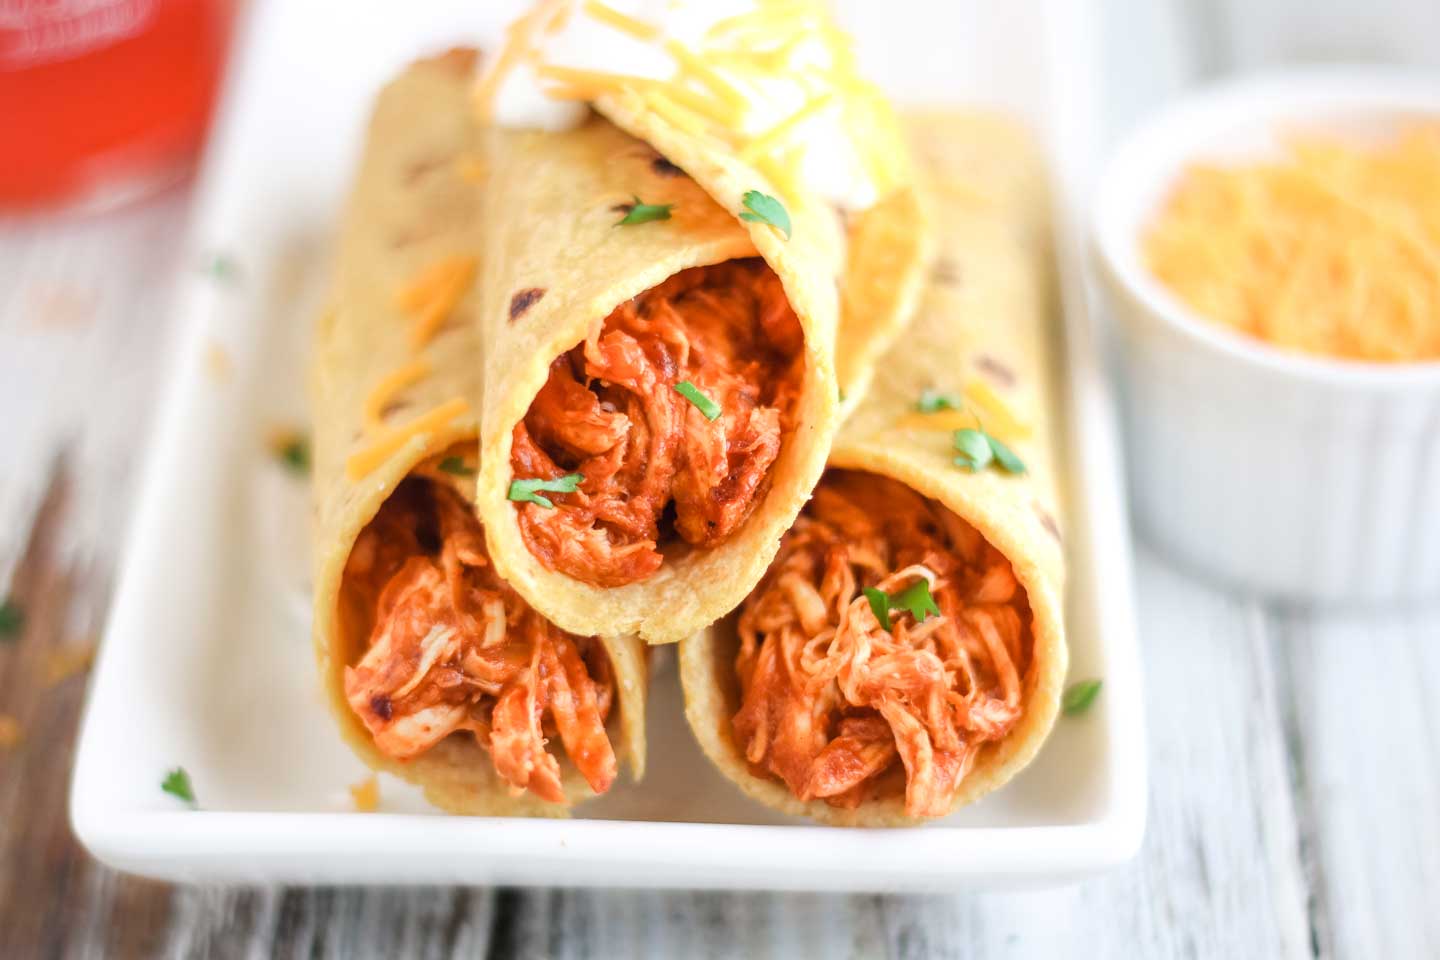 A stack of 3 crock pot chicken tacos on a long white serving plate, made very simply with just the slow cooker chicken taco meat wrapped in corn tortillas.